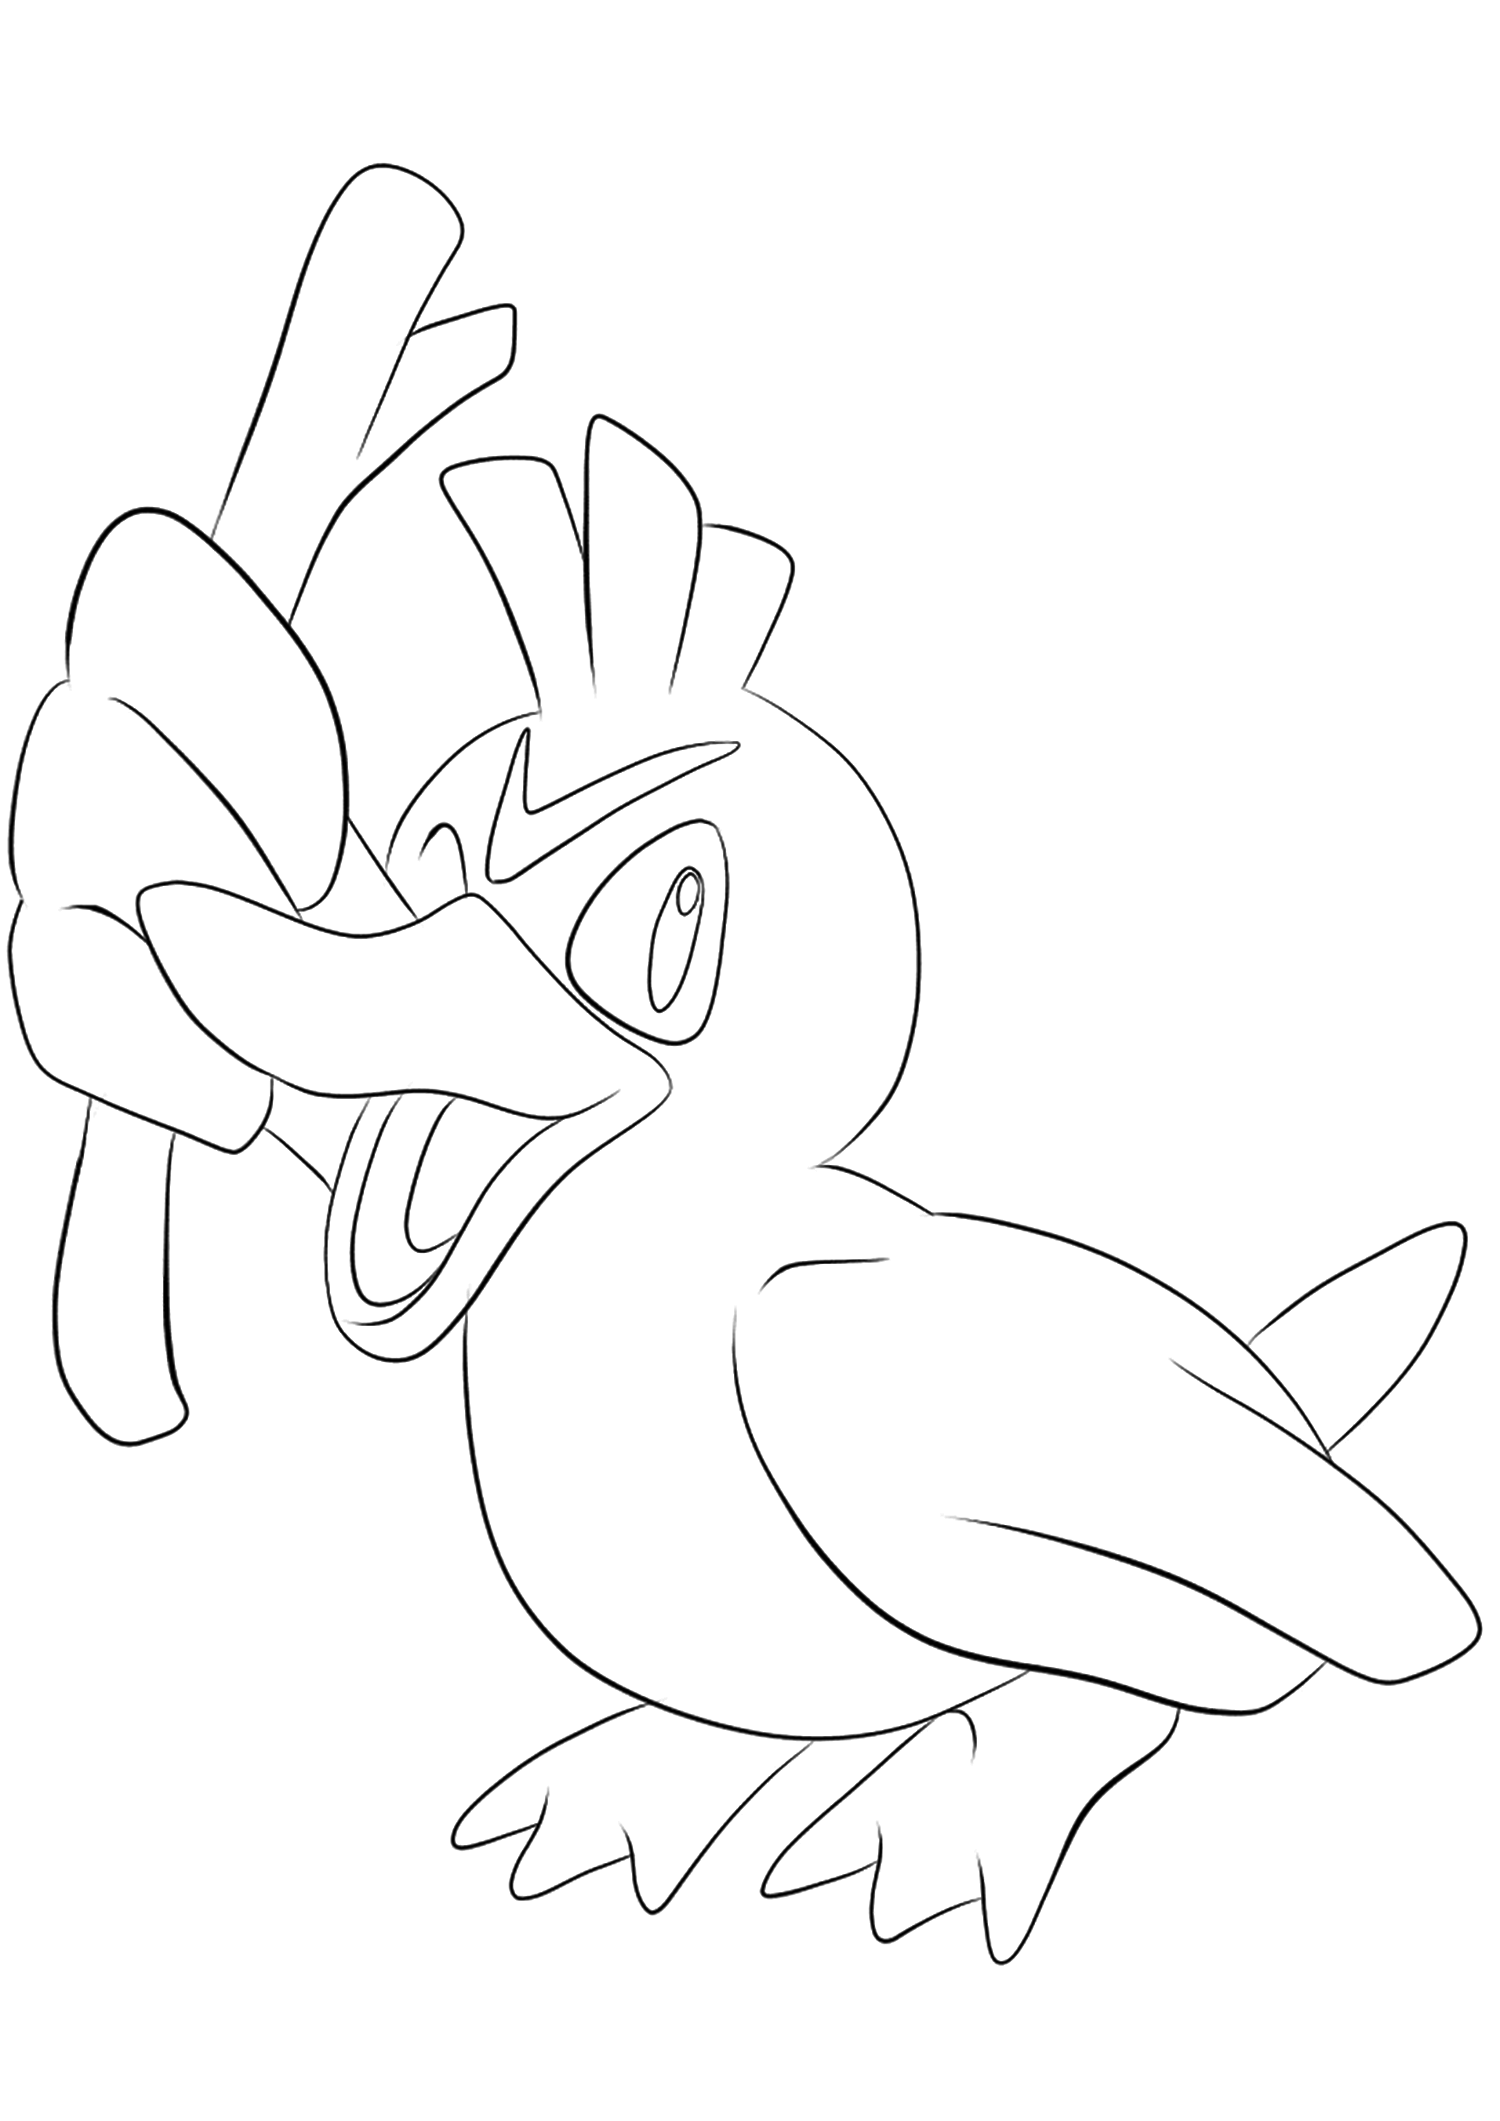 Farfetch'd (No.83). Farfetch'd Coloring page, Generation I Pokemon of type Normal and FlyingOriginal image credit: Pokemon linearts by Lilly Gerbil on Deviantart.Permission:  All rights reserved © Pokemon company and Ken Sugimori.